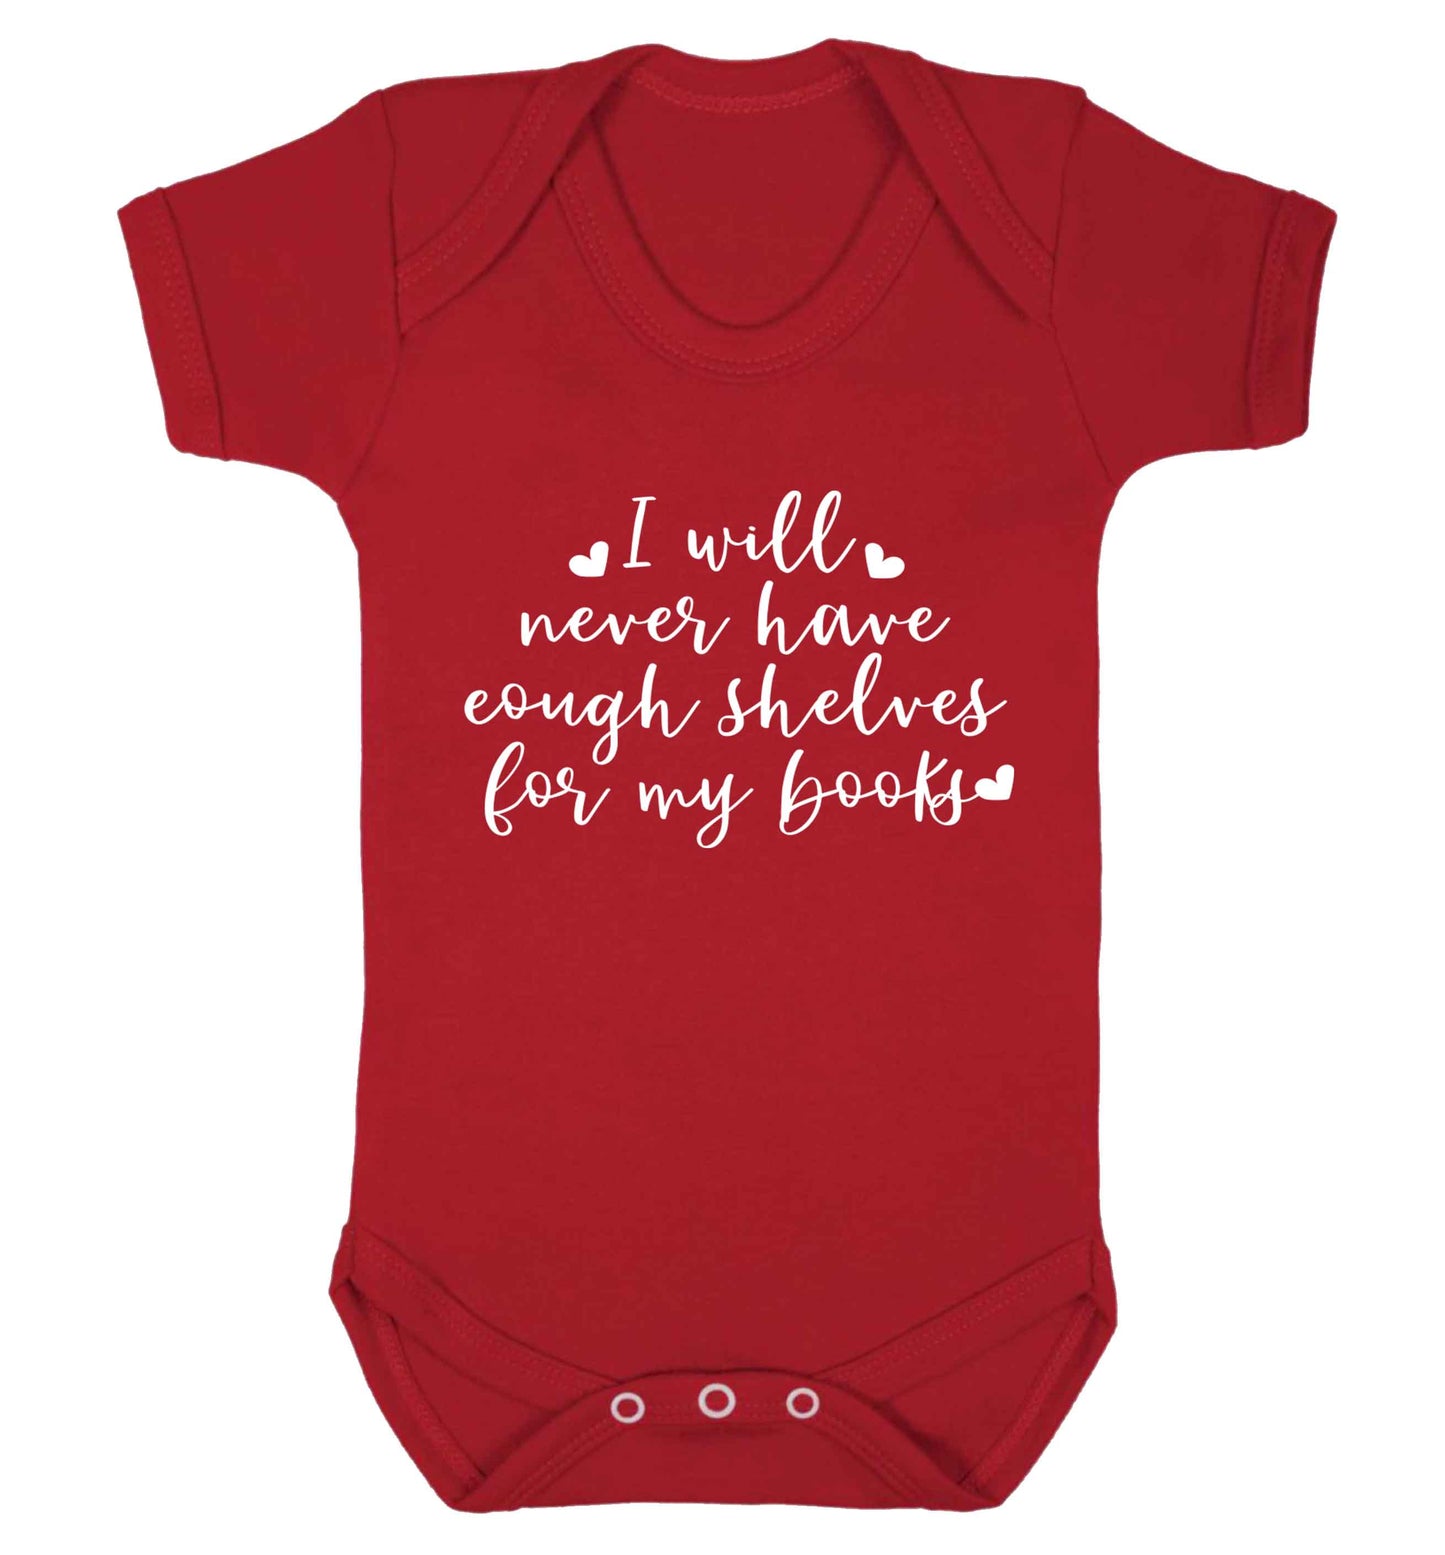 I will never have enough shelves for my books Baby Vest red 18-24 months